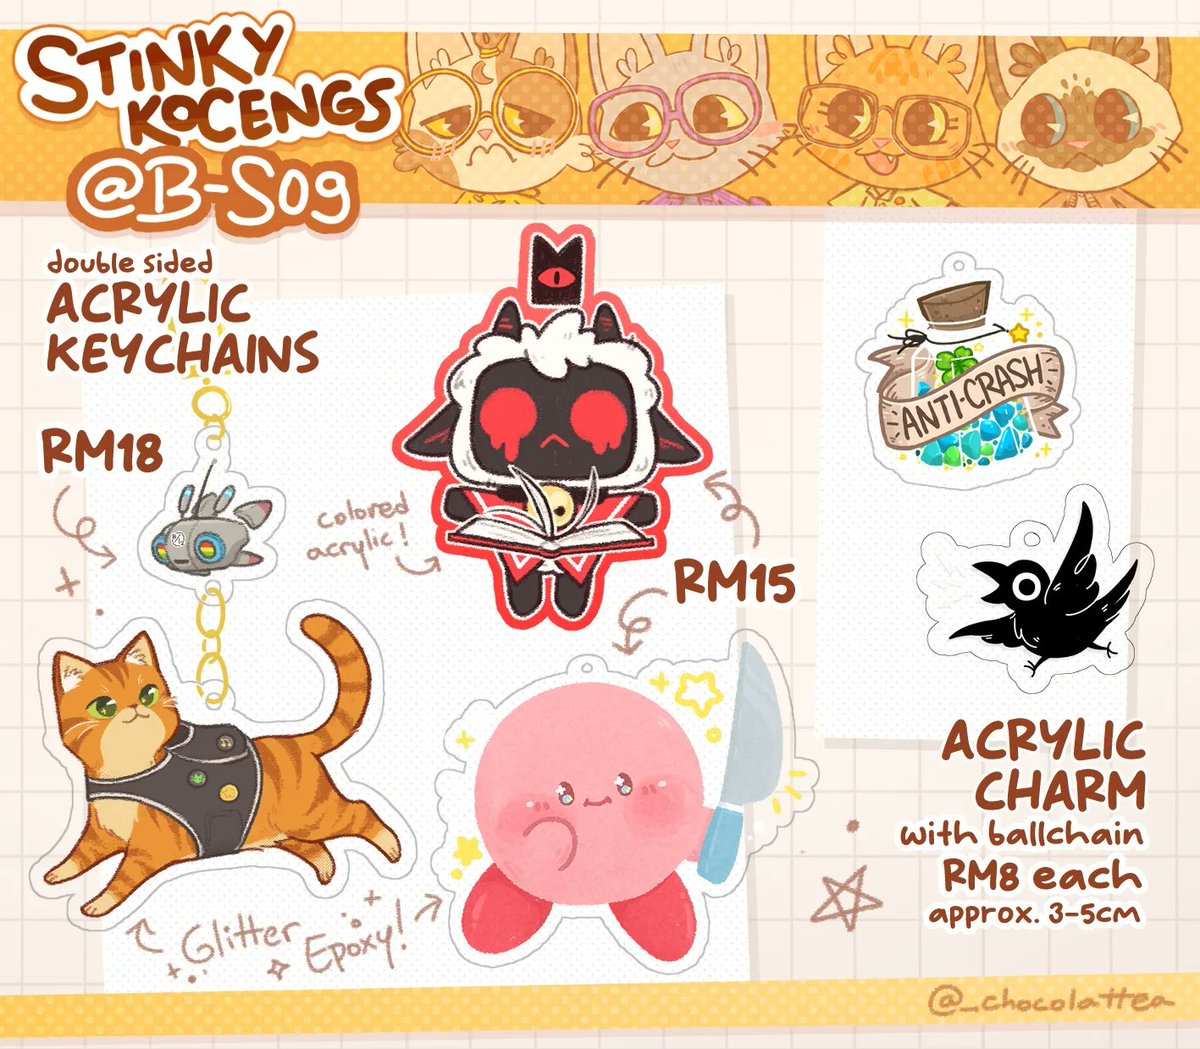 Part 1/2 of my catalogue!

Come drop by to B-S09 Stinky Kocengs to meet me, @pistchachios, @a_liottr, and @dailylouisbella !!!! 🐱🐾✨️ 

#comicfiesta2022 